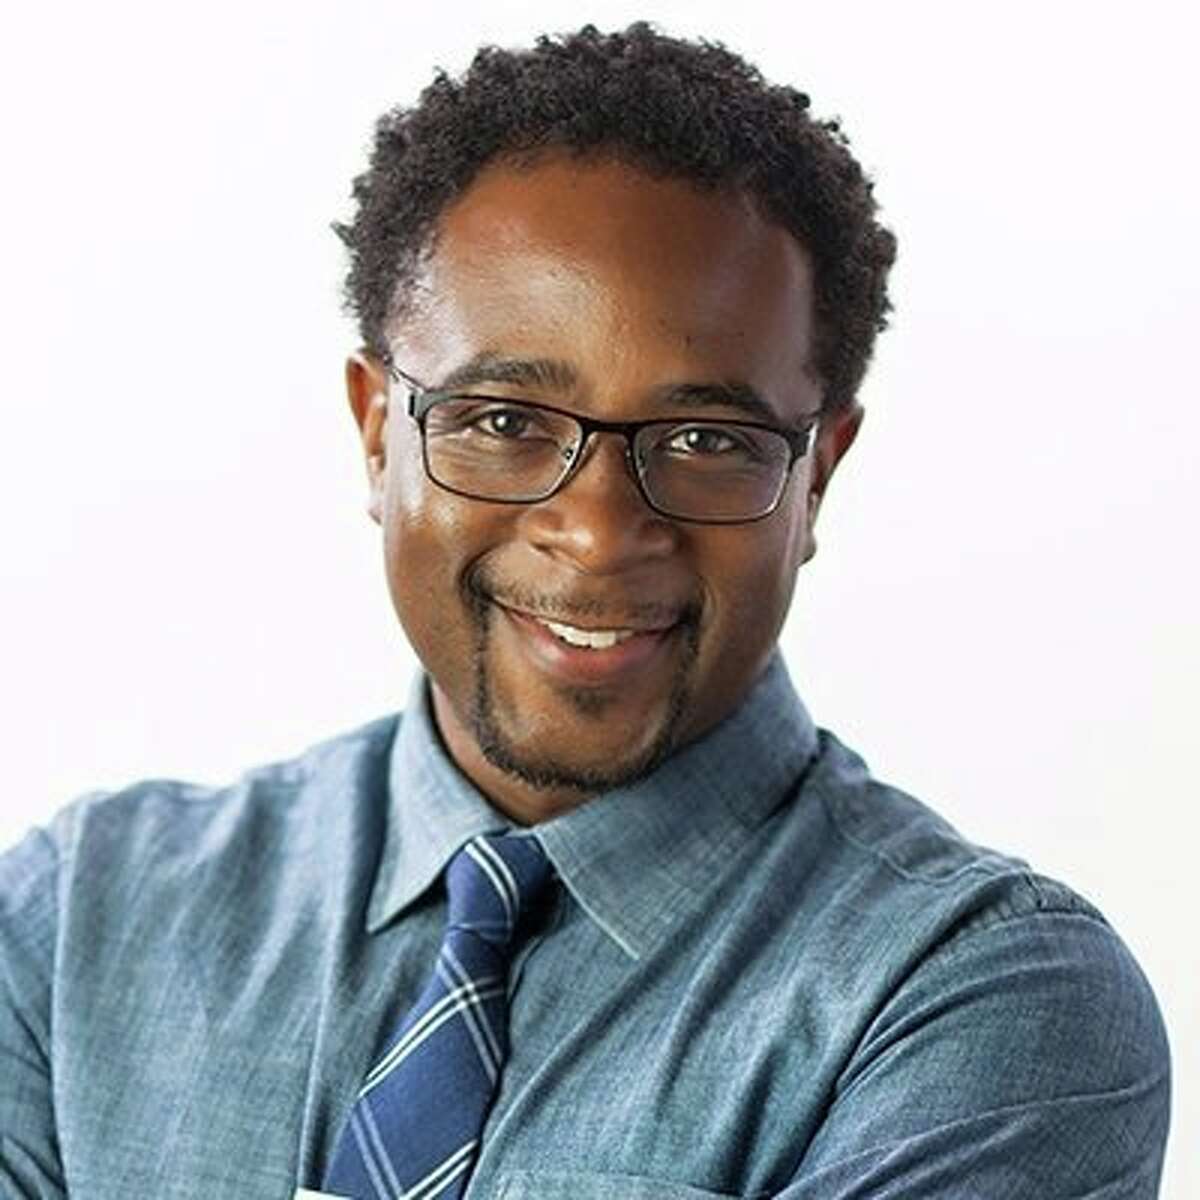 Jemar Tisby, Ph.D., is a New York Times bestselling author, national speaker, and public historian. He is the author of "The Color of Compromise: The Truth about the American Church’s Complicity in Racism and How to Fight Racism." You can find him at JemarTisby.Substack.com.   